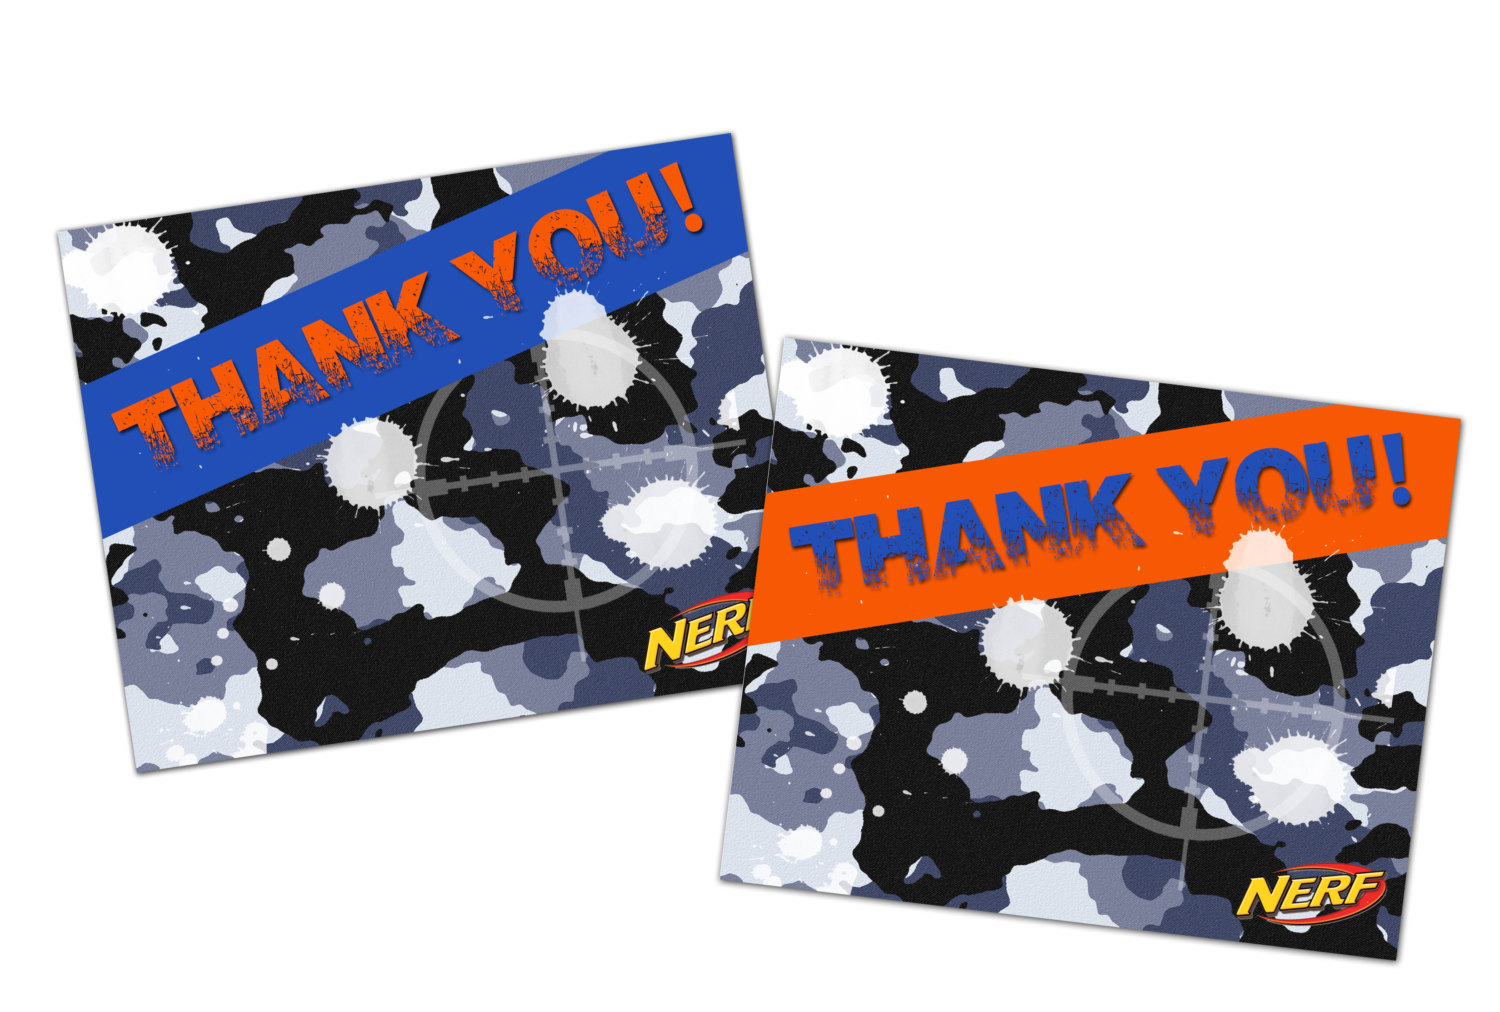 printable-nerf-thank-you-cards-by-craftboxstudio-on-etsy